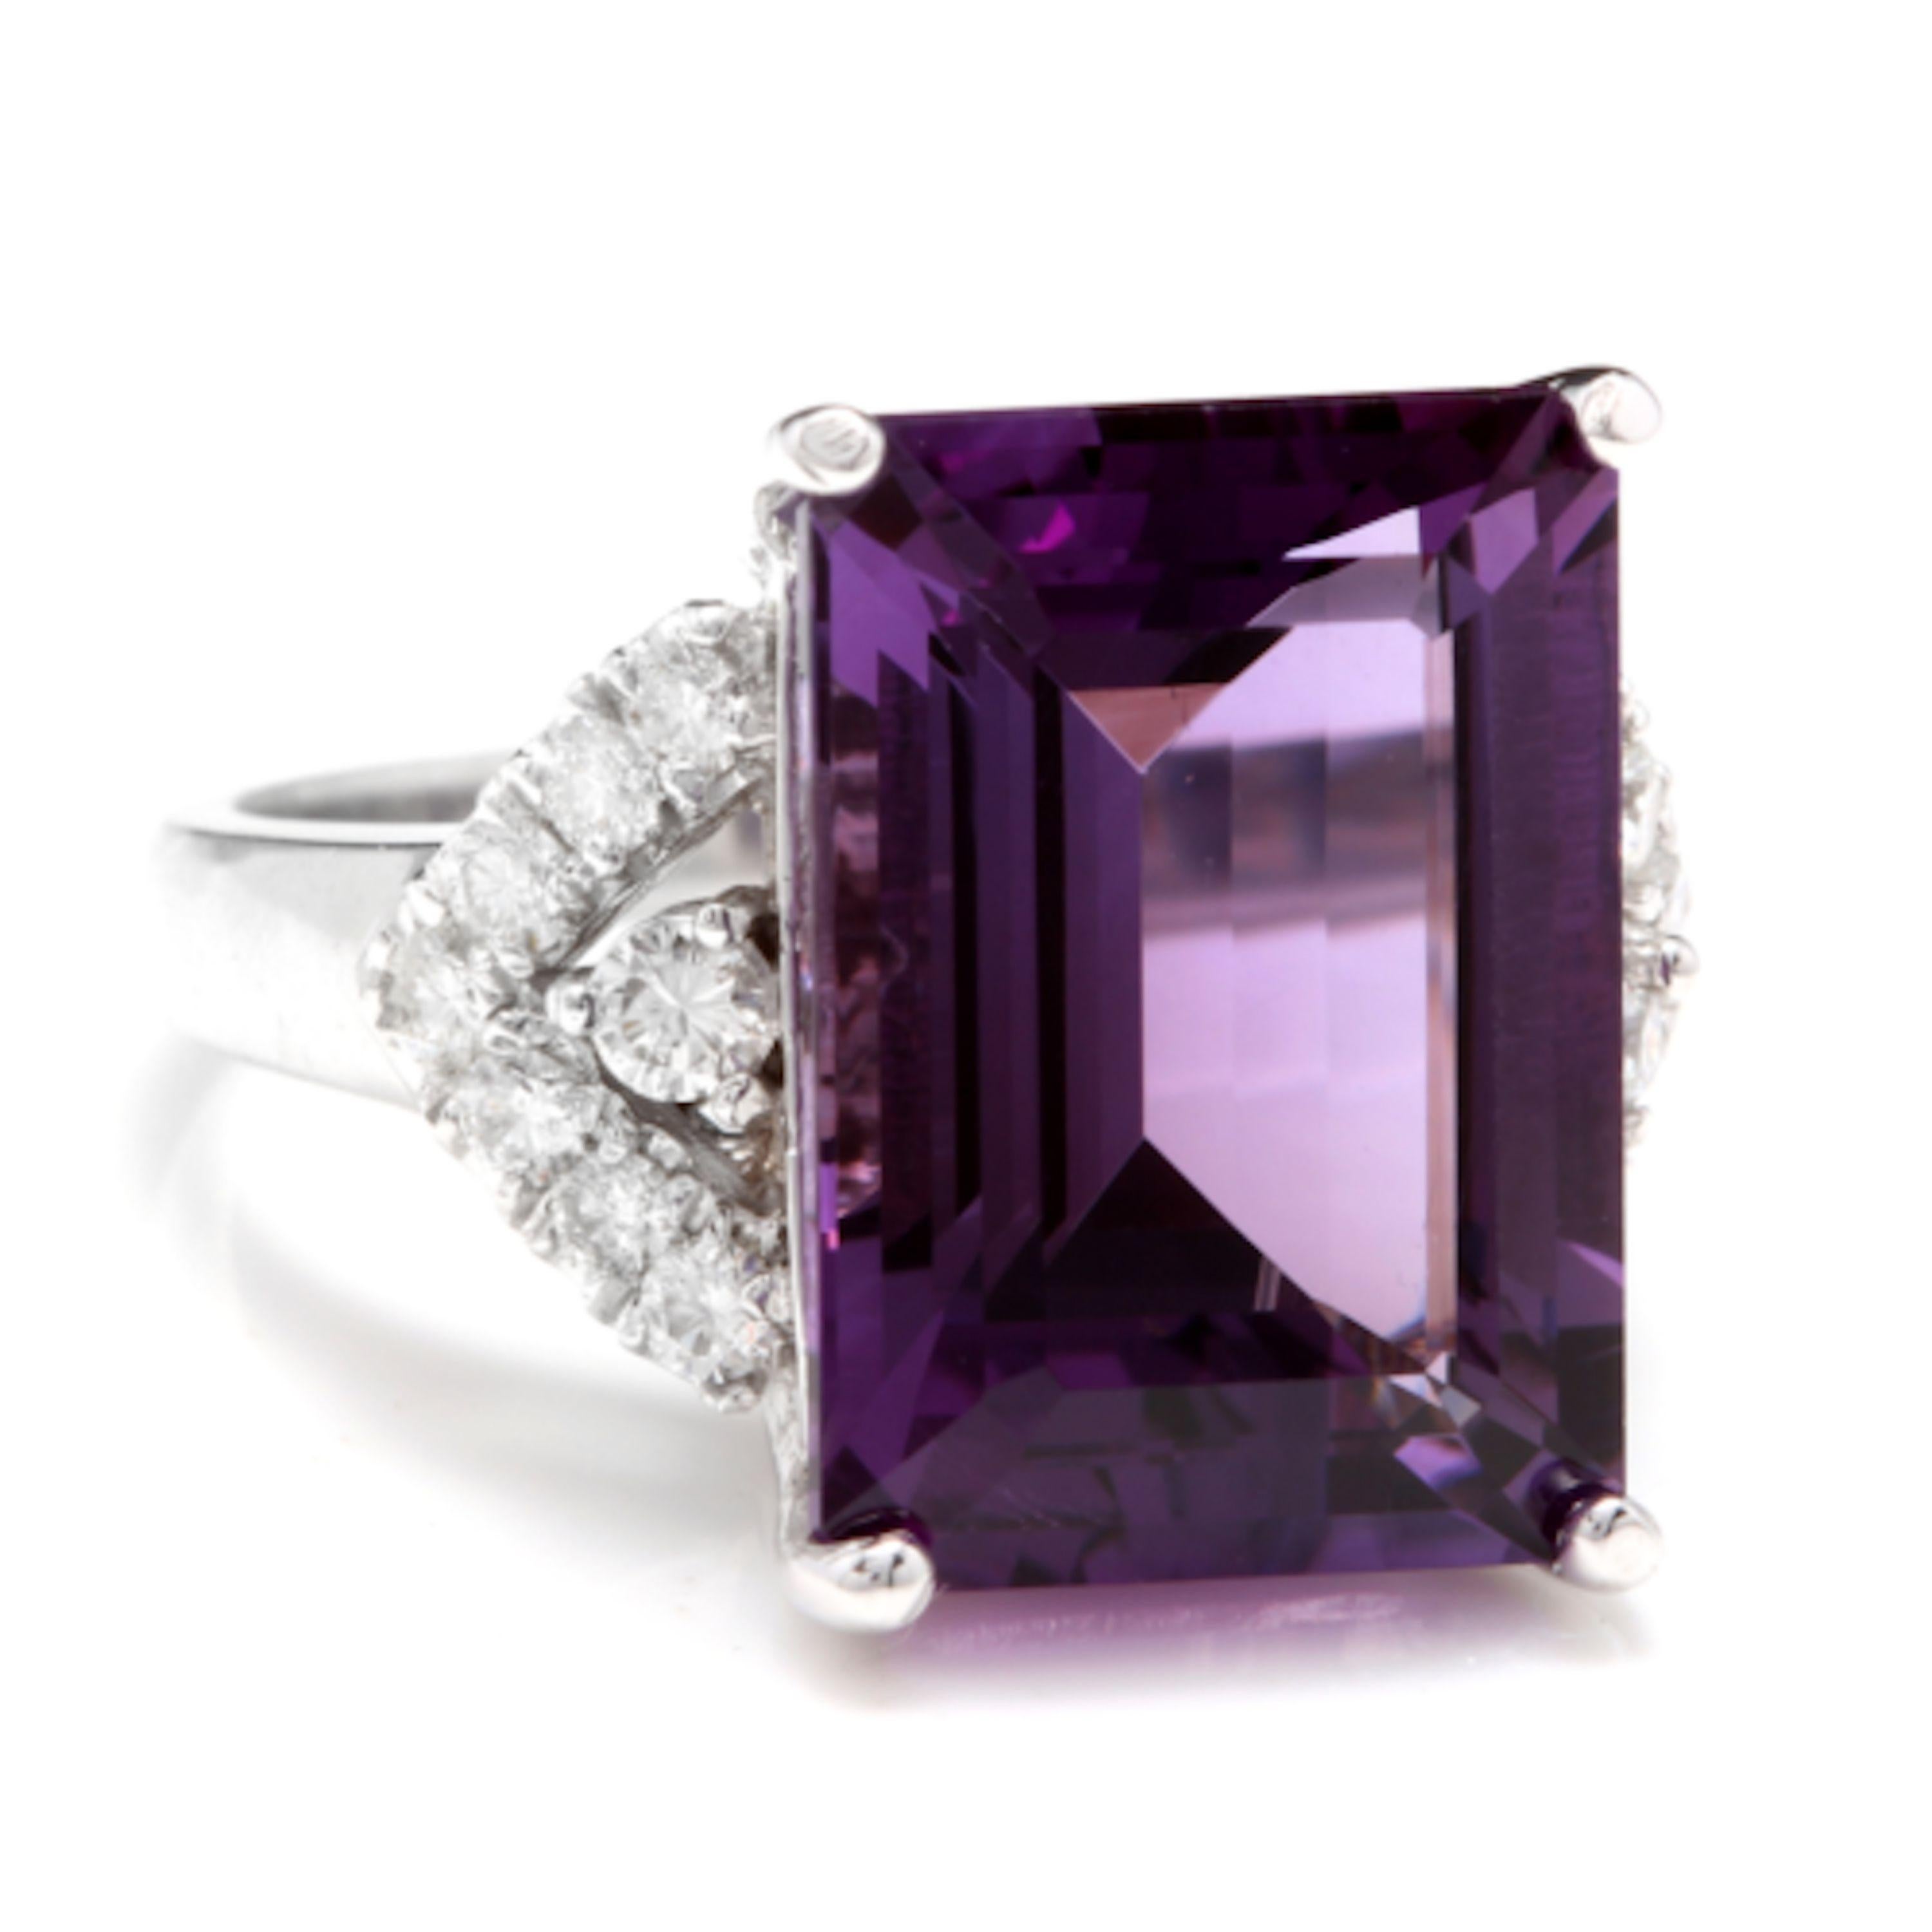 14.70 Carats Natural Amethyst and Diamond 14K Solid White Gold Ring

Total Natural Emerald Cut Amethyst Weights: Approx. 14.00 Carats

Amethyst Measures: Approx. 16 x 12mm

Natural Round Diamonds Weight: Approx. 0.70 Carats (color G-H / Clarity